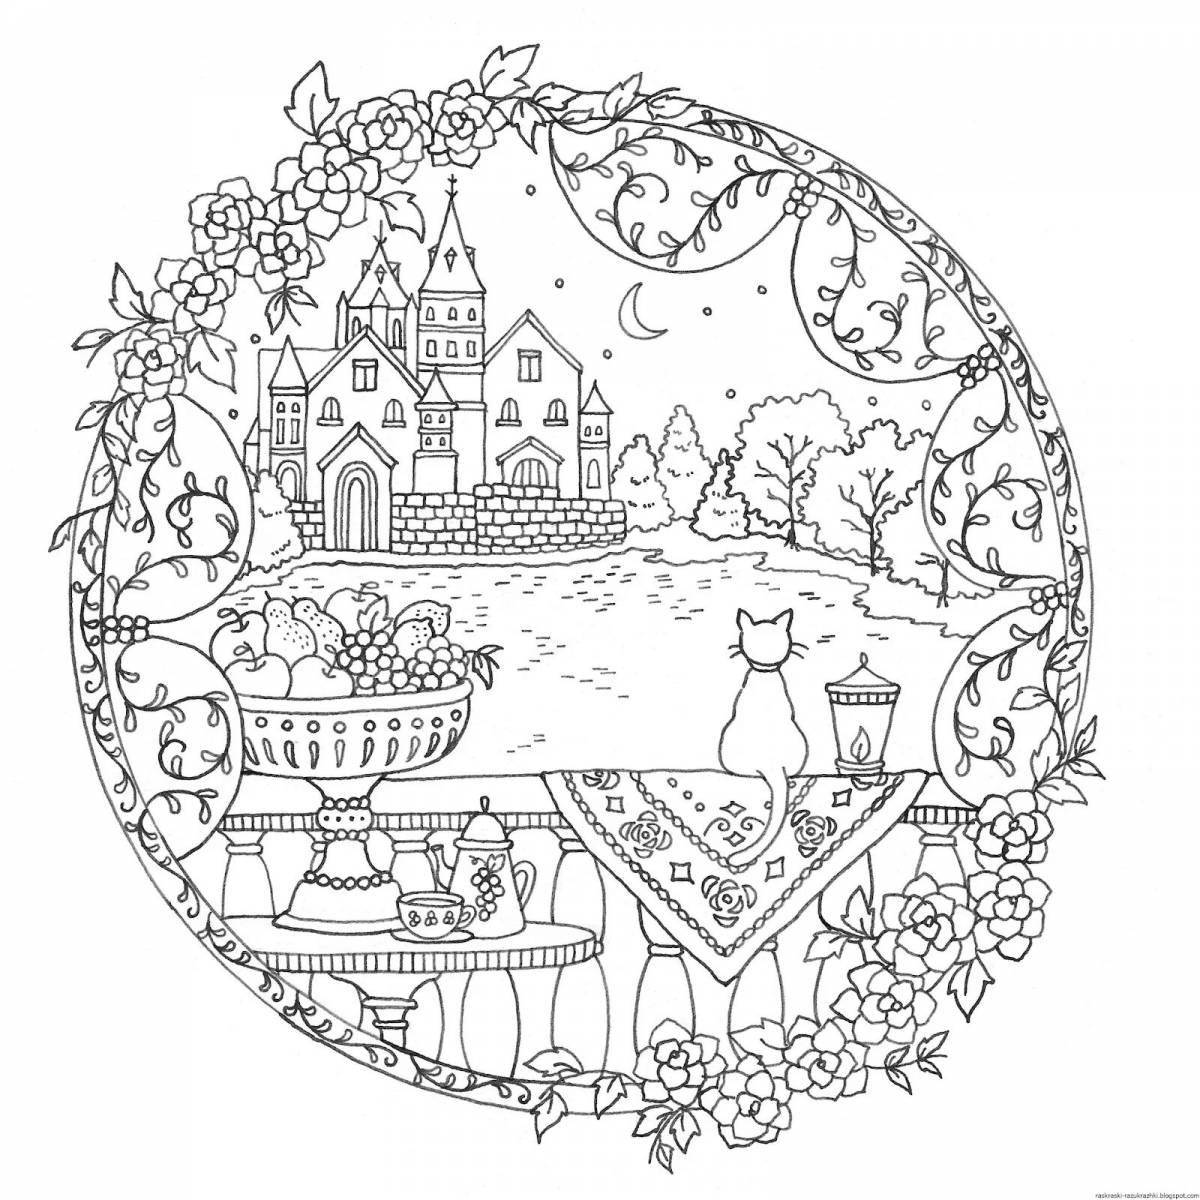 Coloring pages of countries